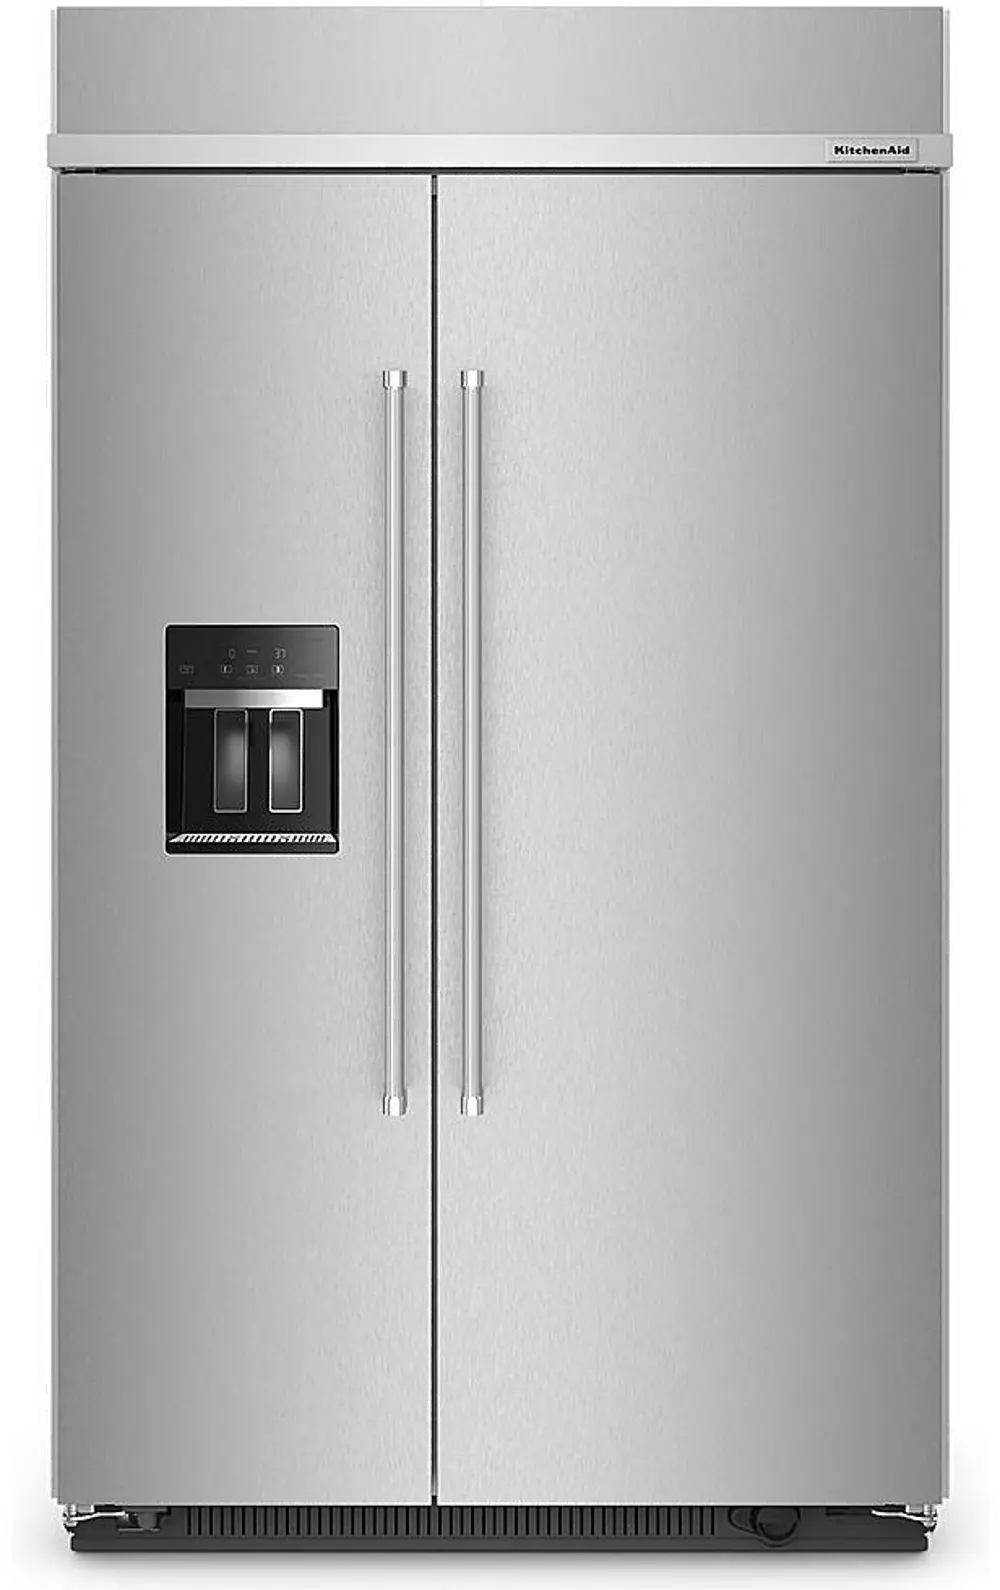 KBSD708MPS KitchenAid 29.4 cu ft Side-By-Side Refrigerator - 48  Built-In Stainless Steel-1